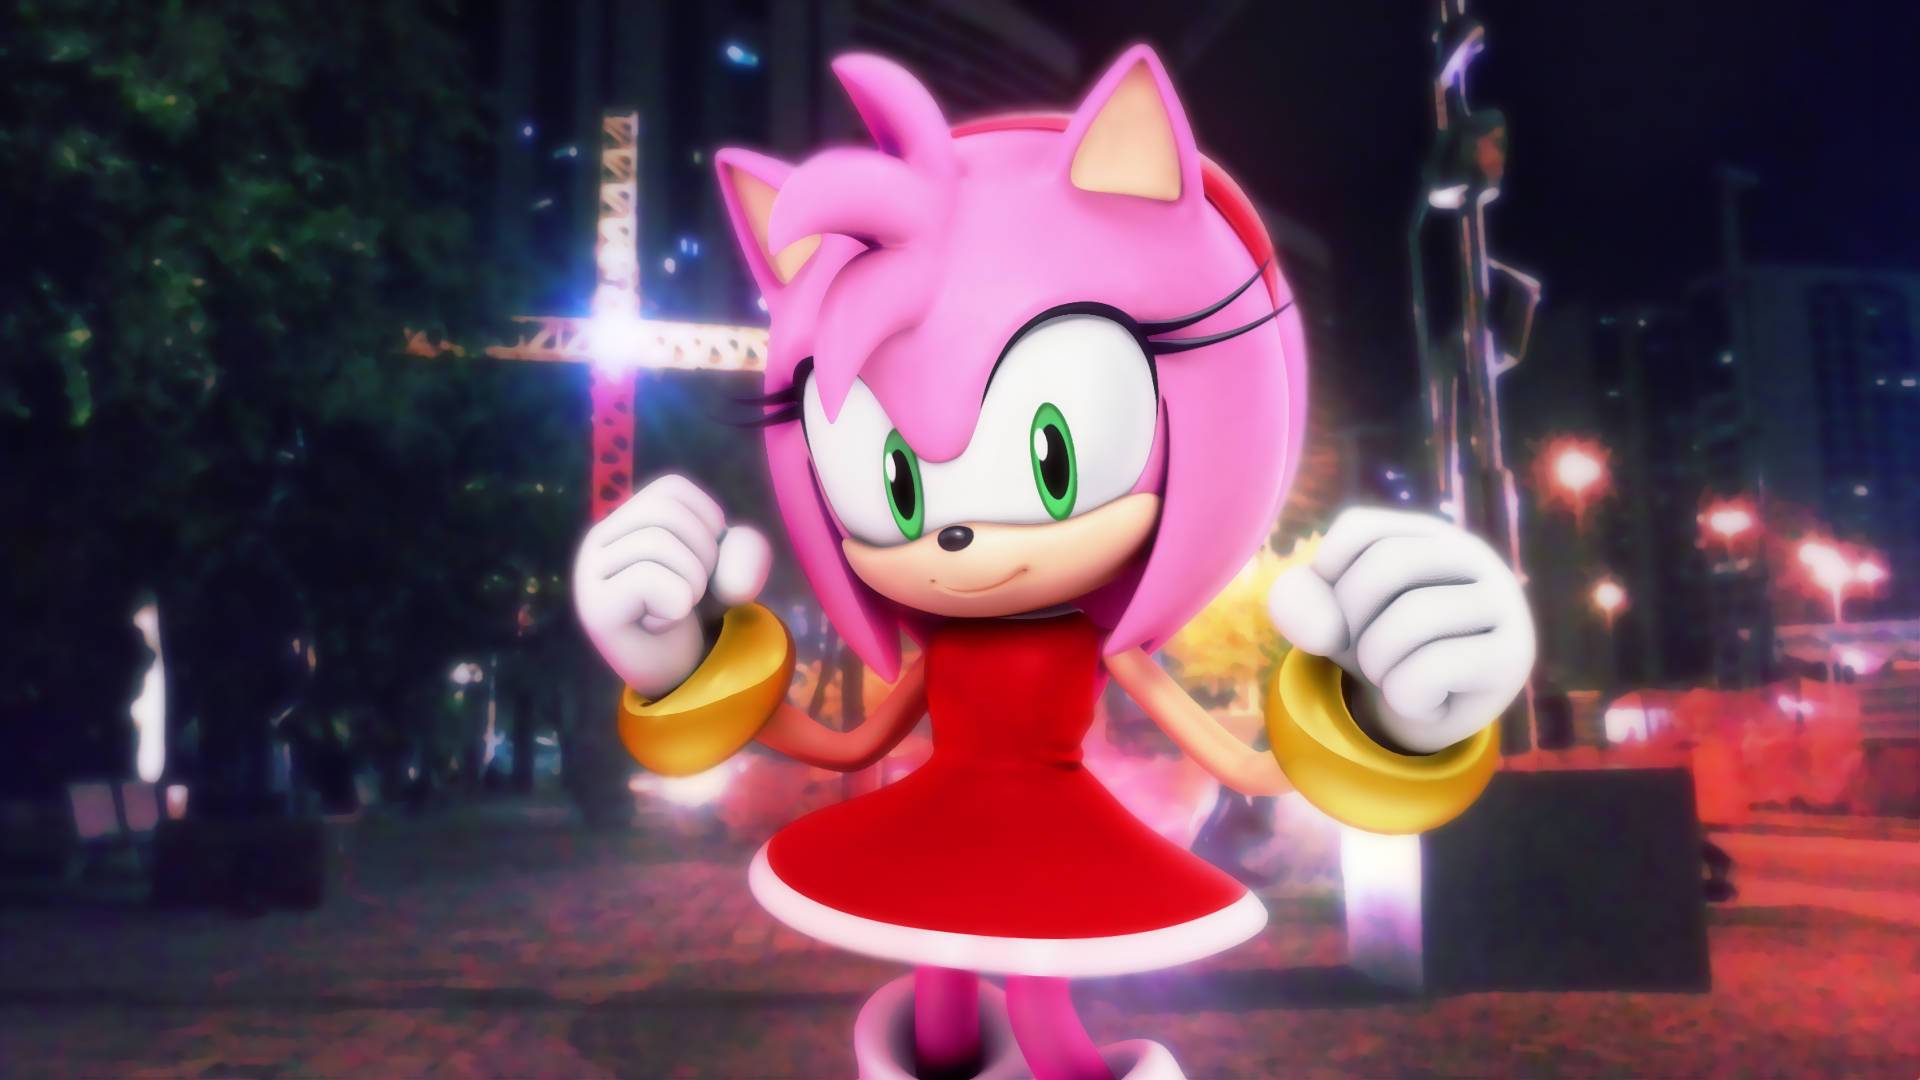 Strong Amy Rose